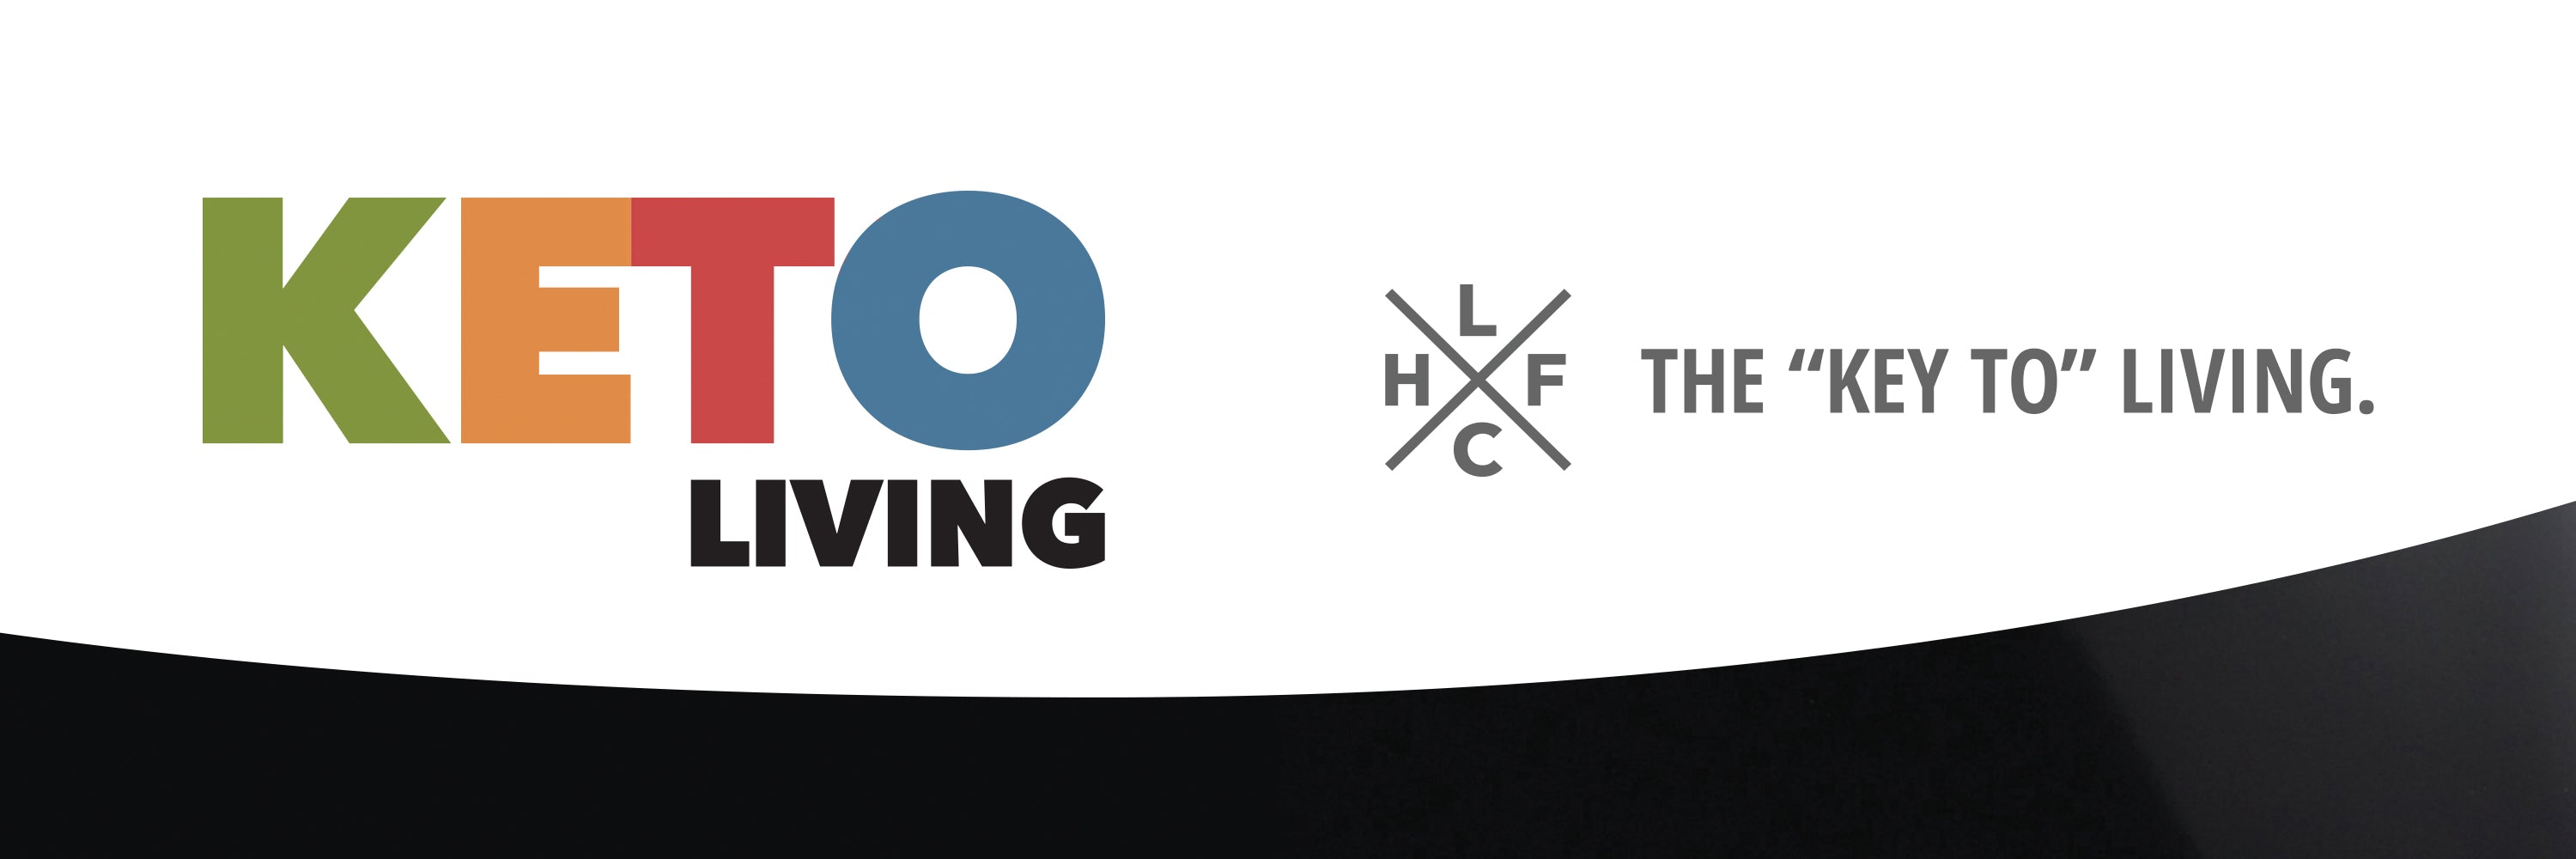 KetoLiving collection image banner